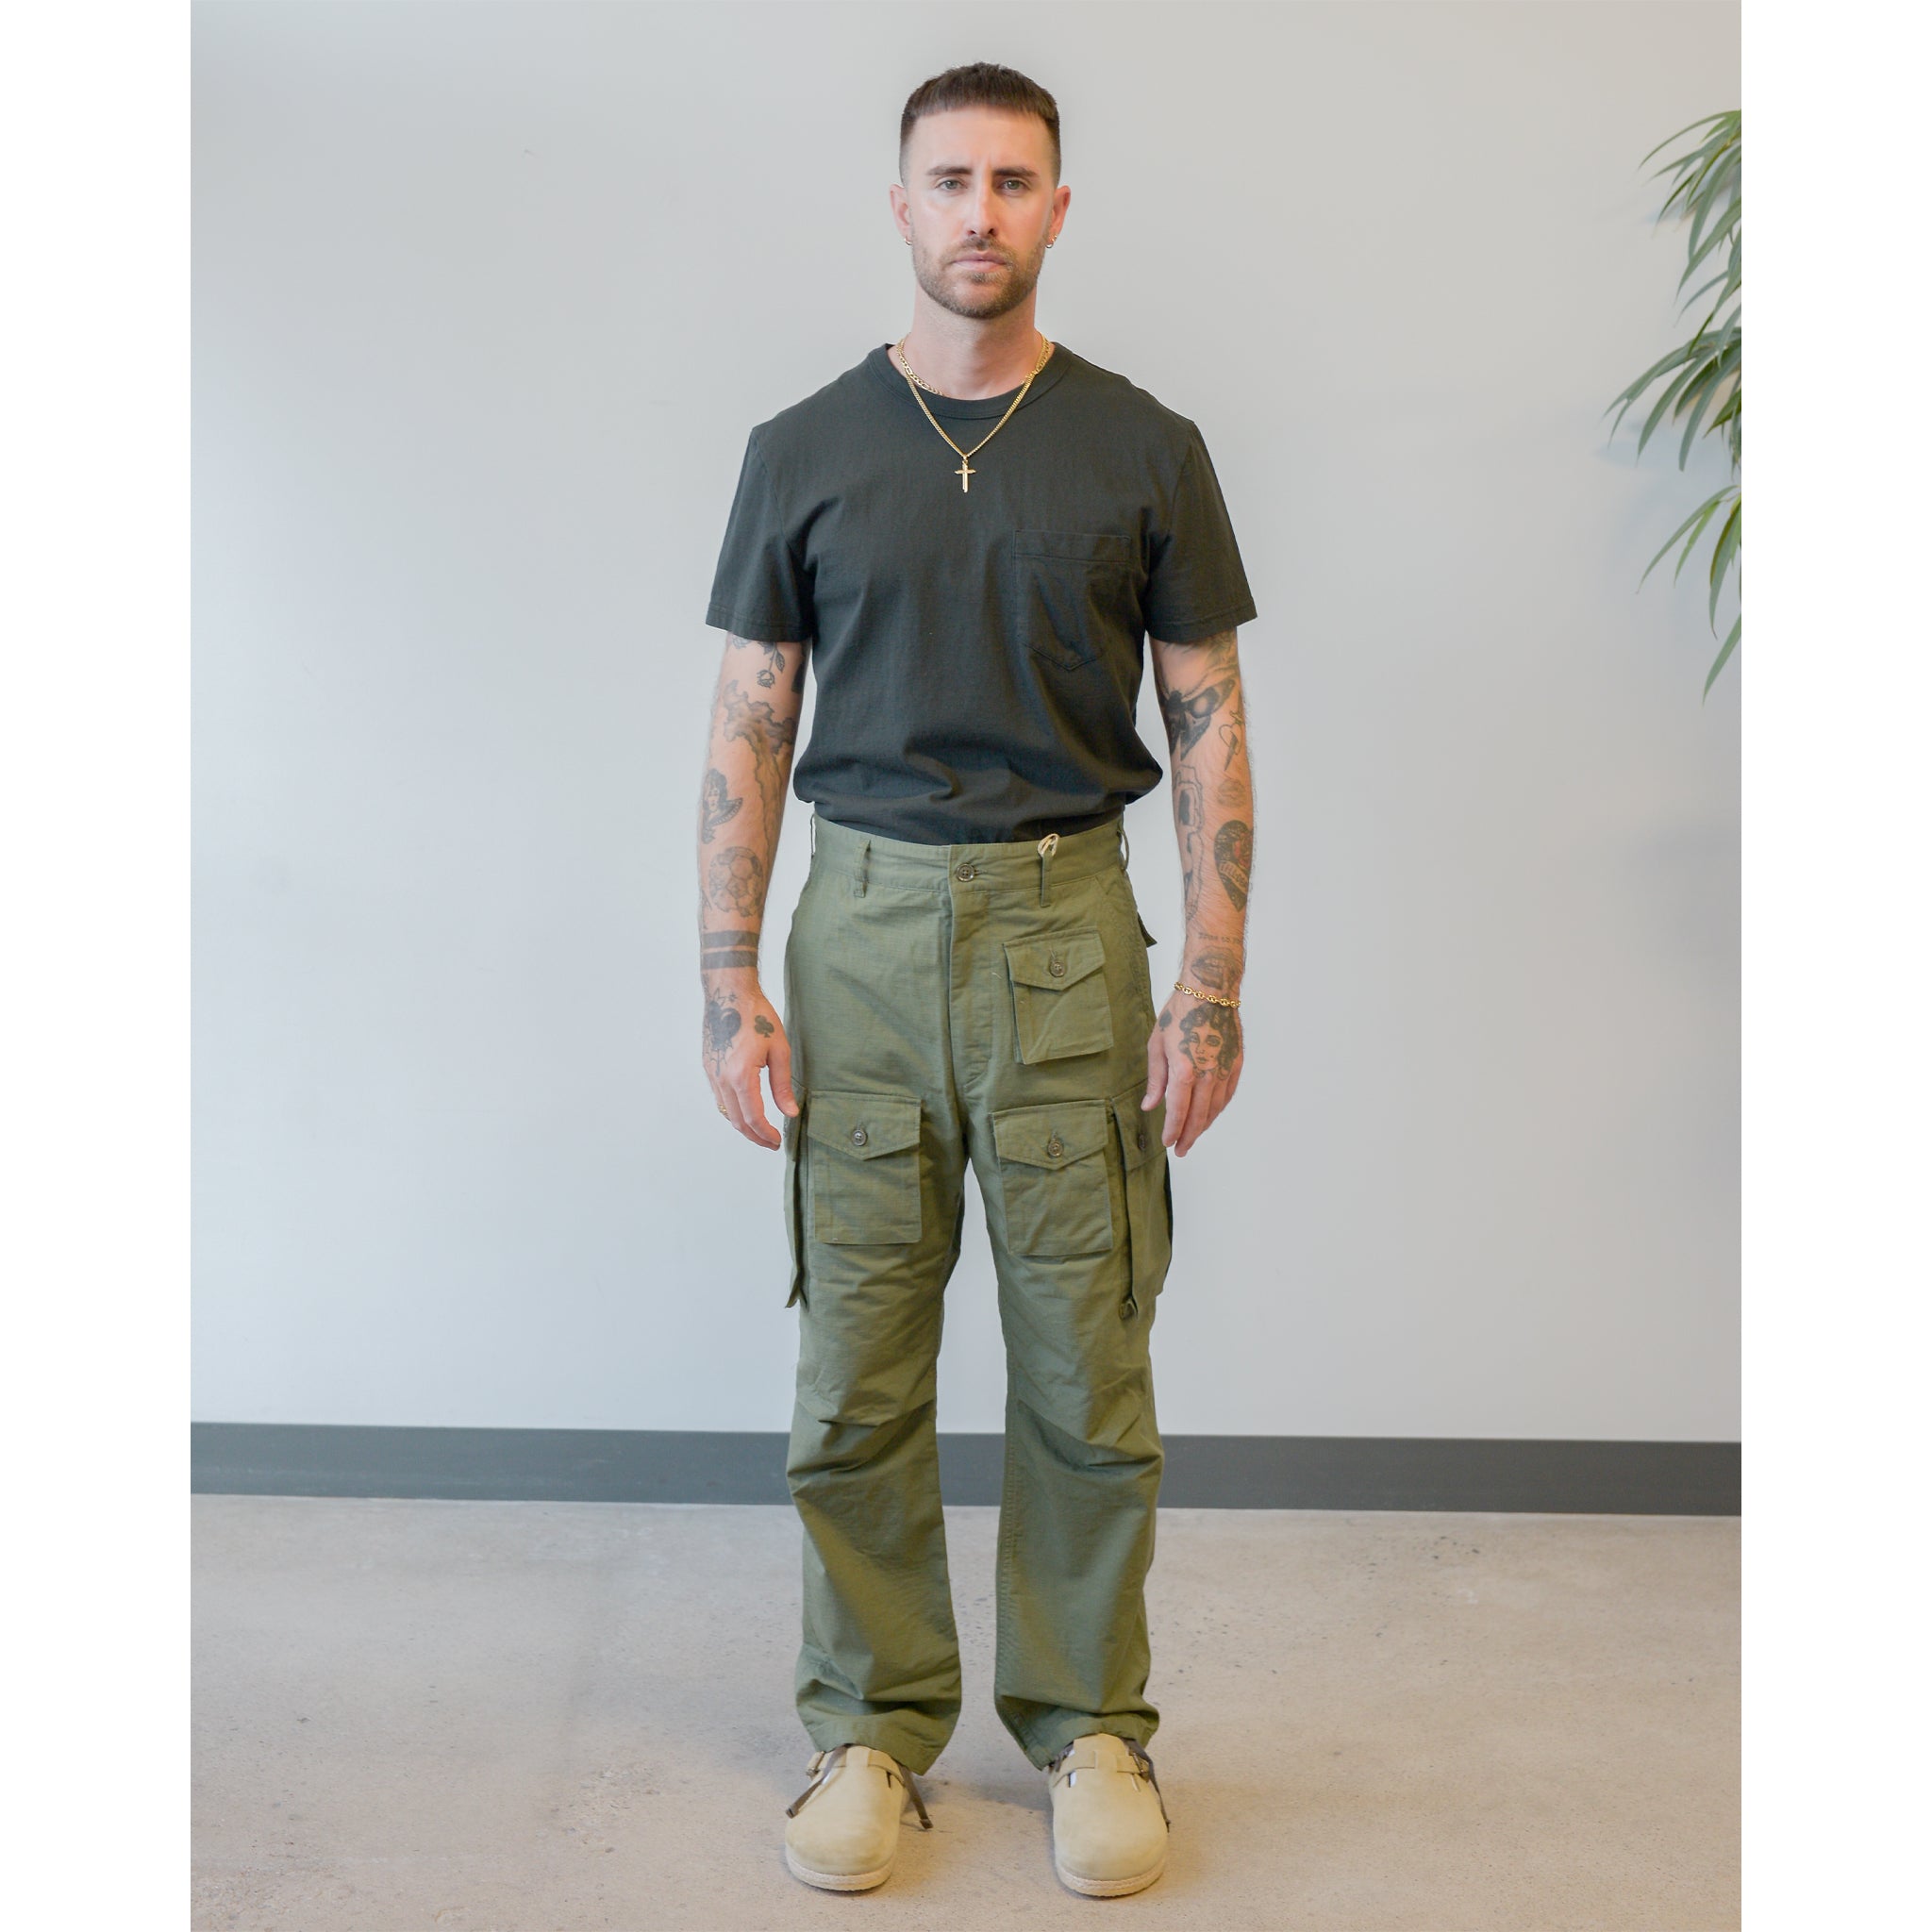 Engineered Garments FA Pant Olive Cotton Ripstop – The Foxhole